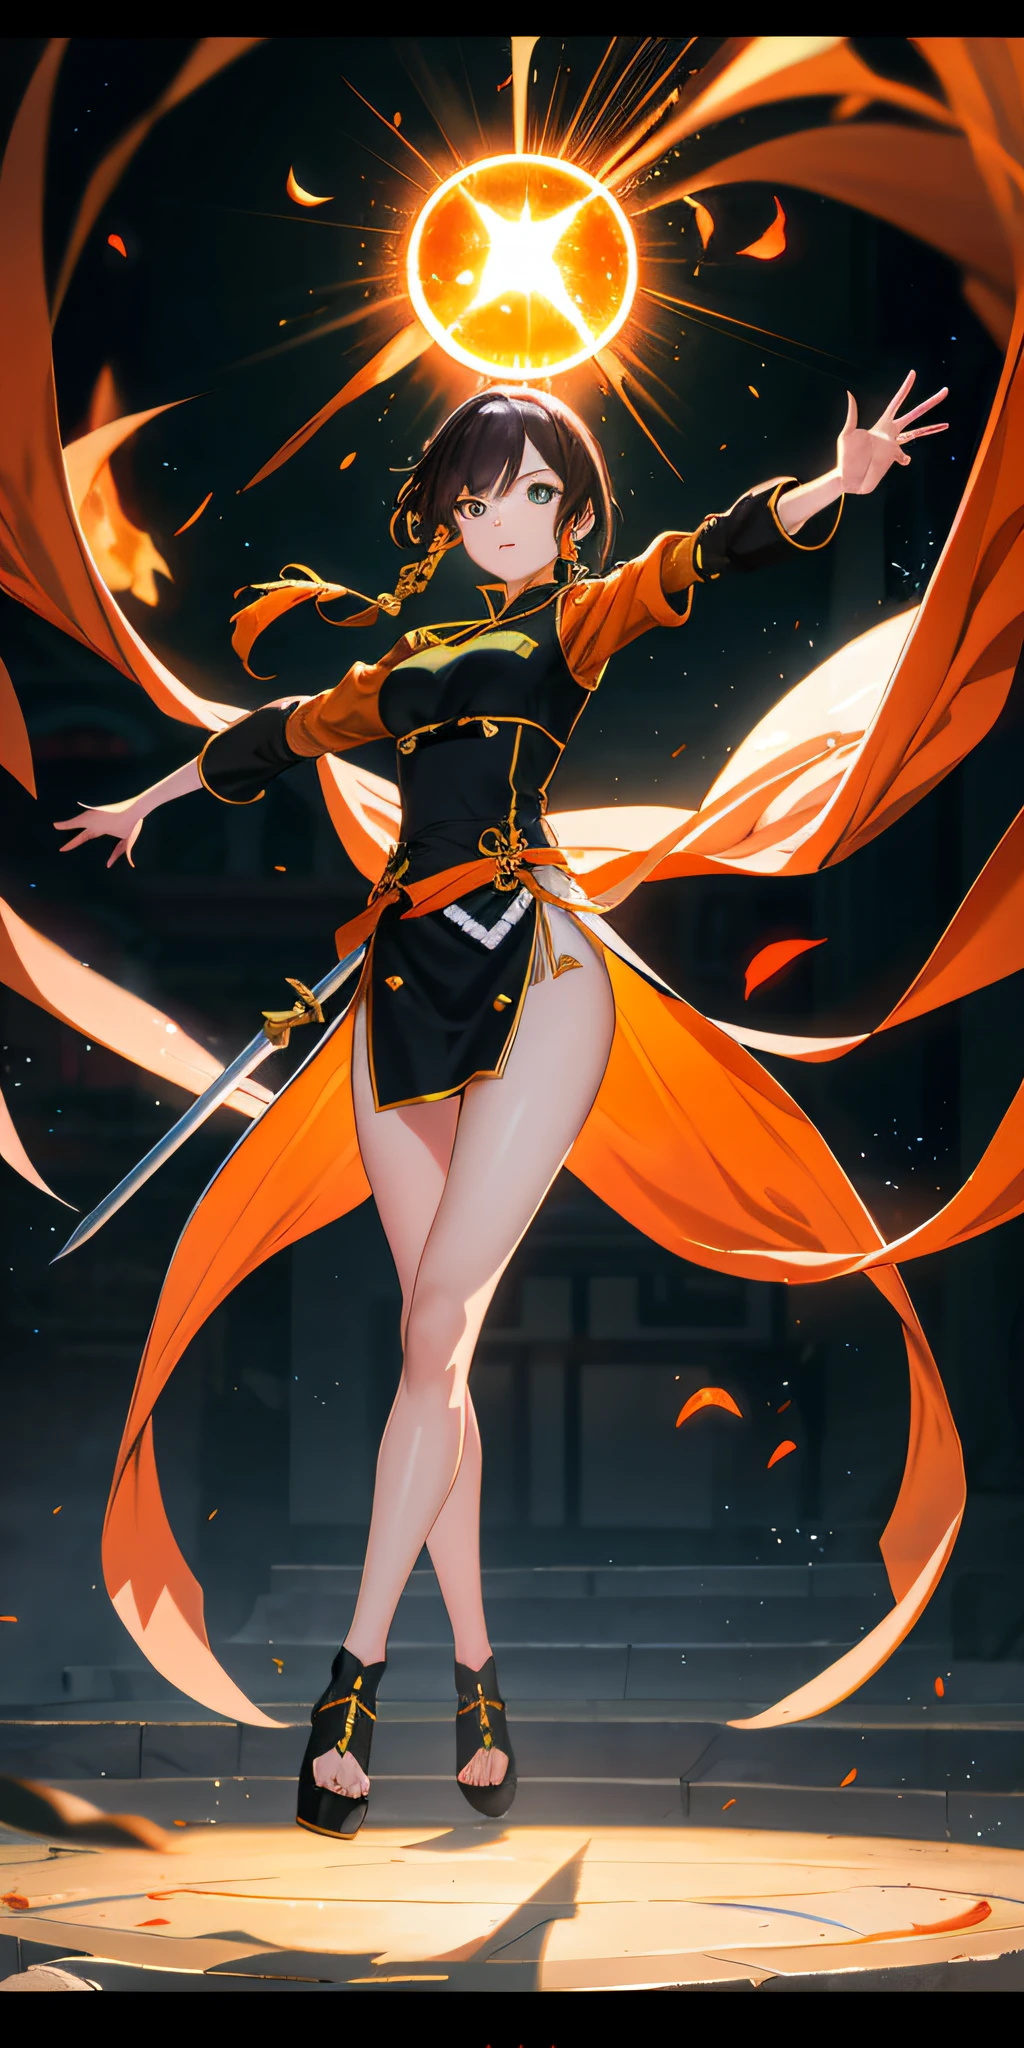 Fisheye lens with flame in background, Chinese girl dancing sword, Dressed in a Tang costume, One guy, Upward light, Ray tracing, Edge light, Glow effect, Exaggerated action, Exaggerated perspective, Orange, Green, Realistic ultra-fine rendering style, Super detail, blender, Octane stereotyping